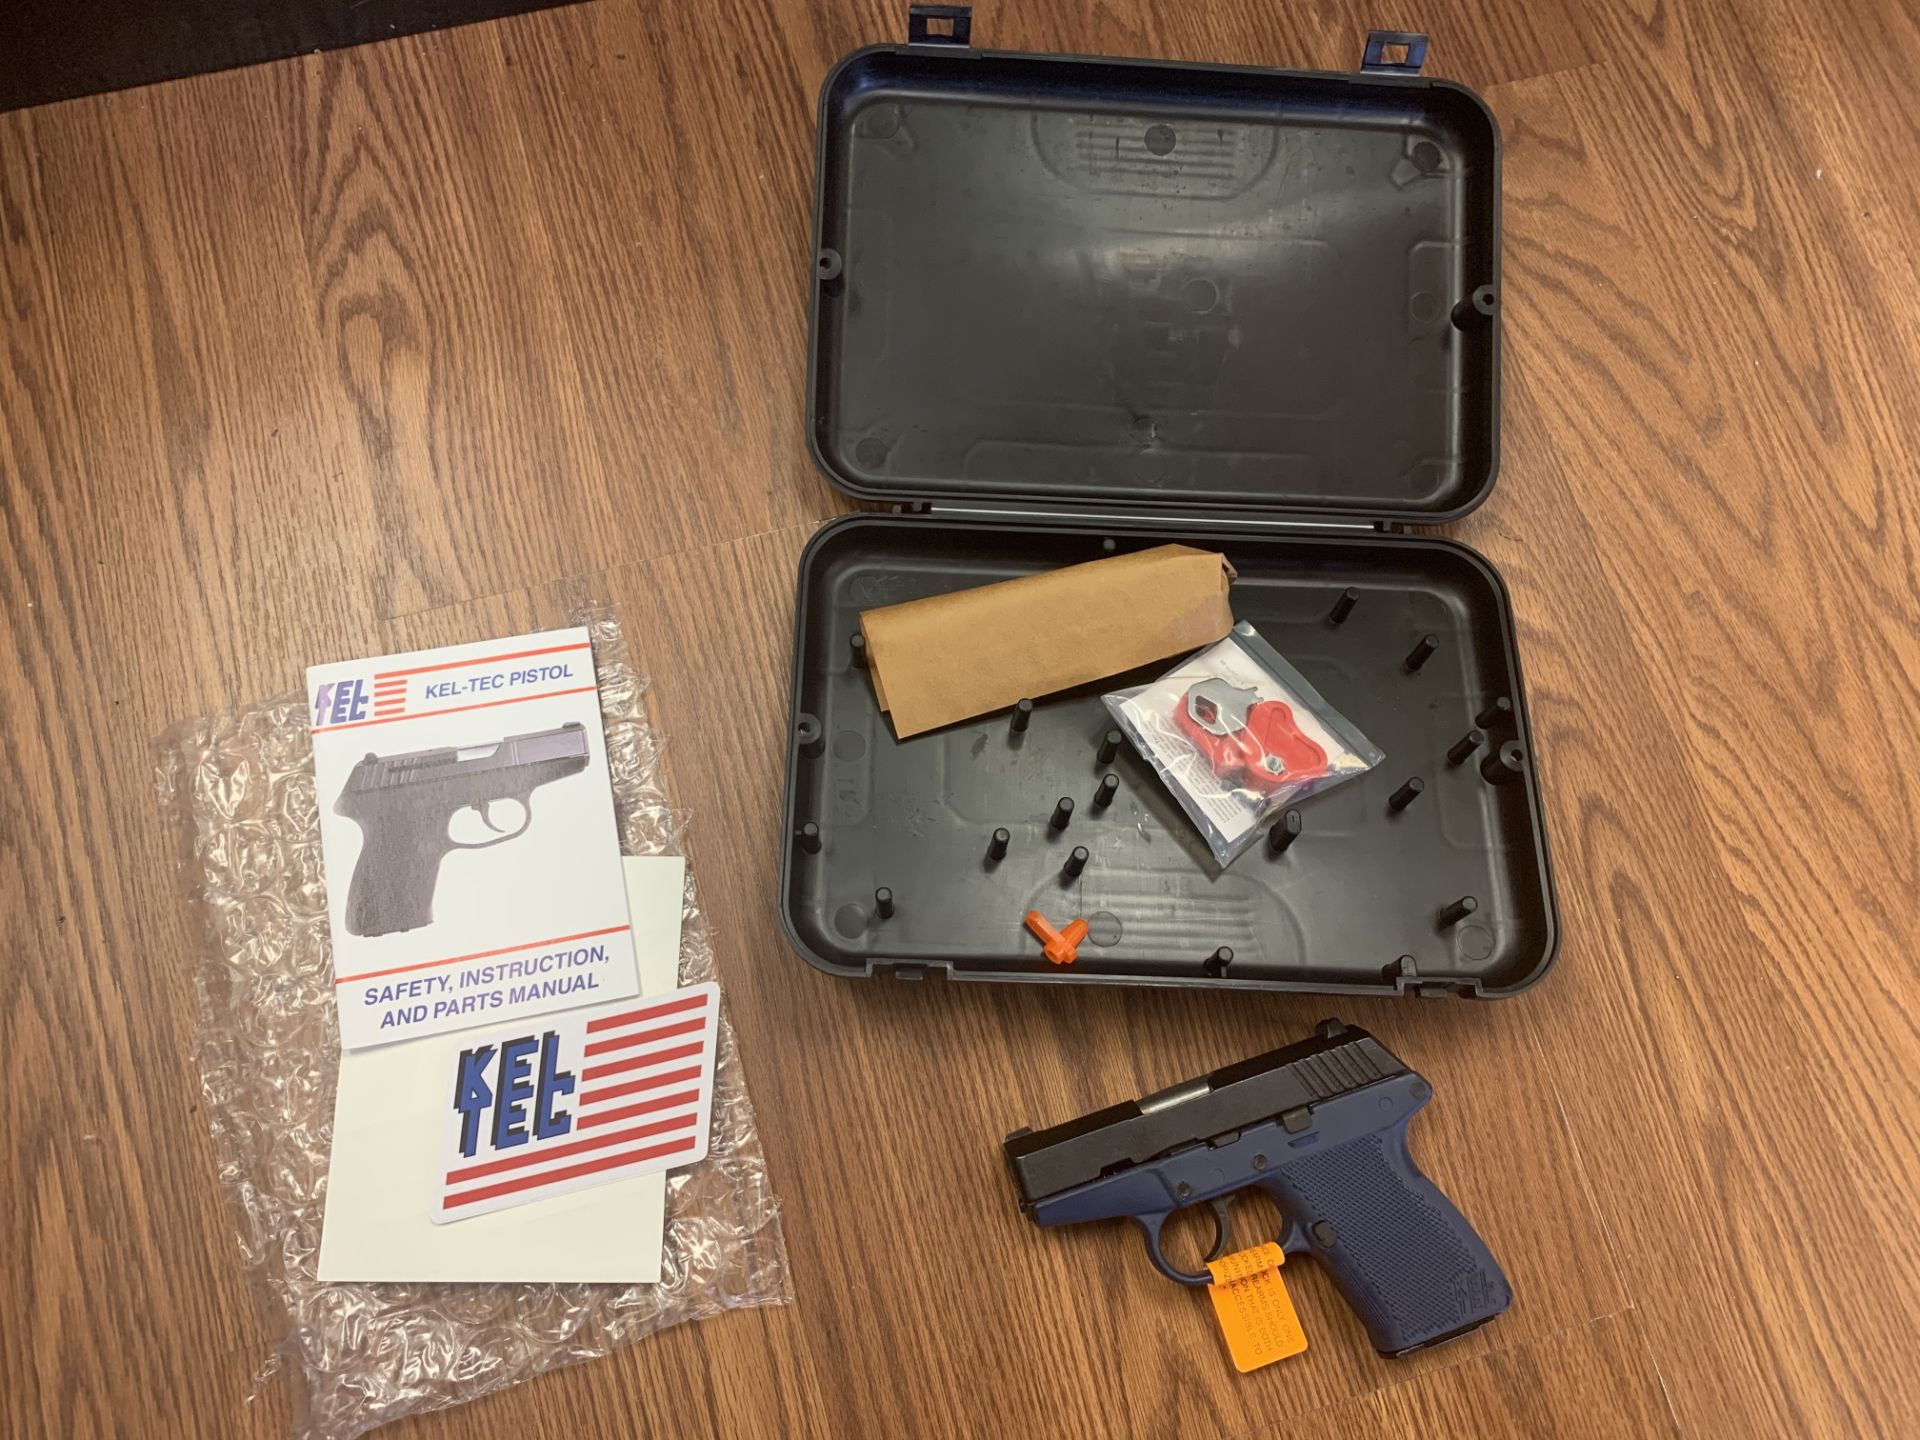 KELTEC P-11 PISTOL 9MM LUGER - NAVY BLUE - WITH BOX (NEW) - Image 4 of 4